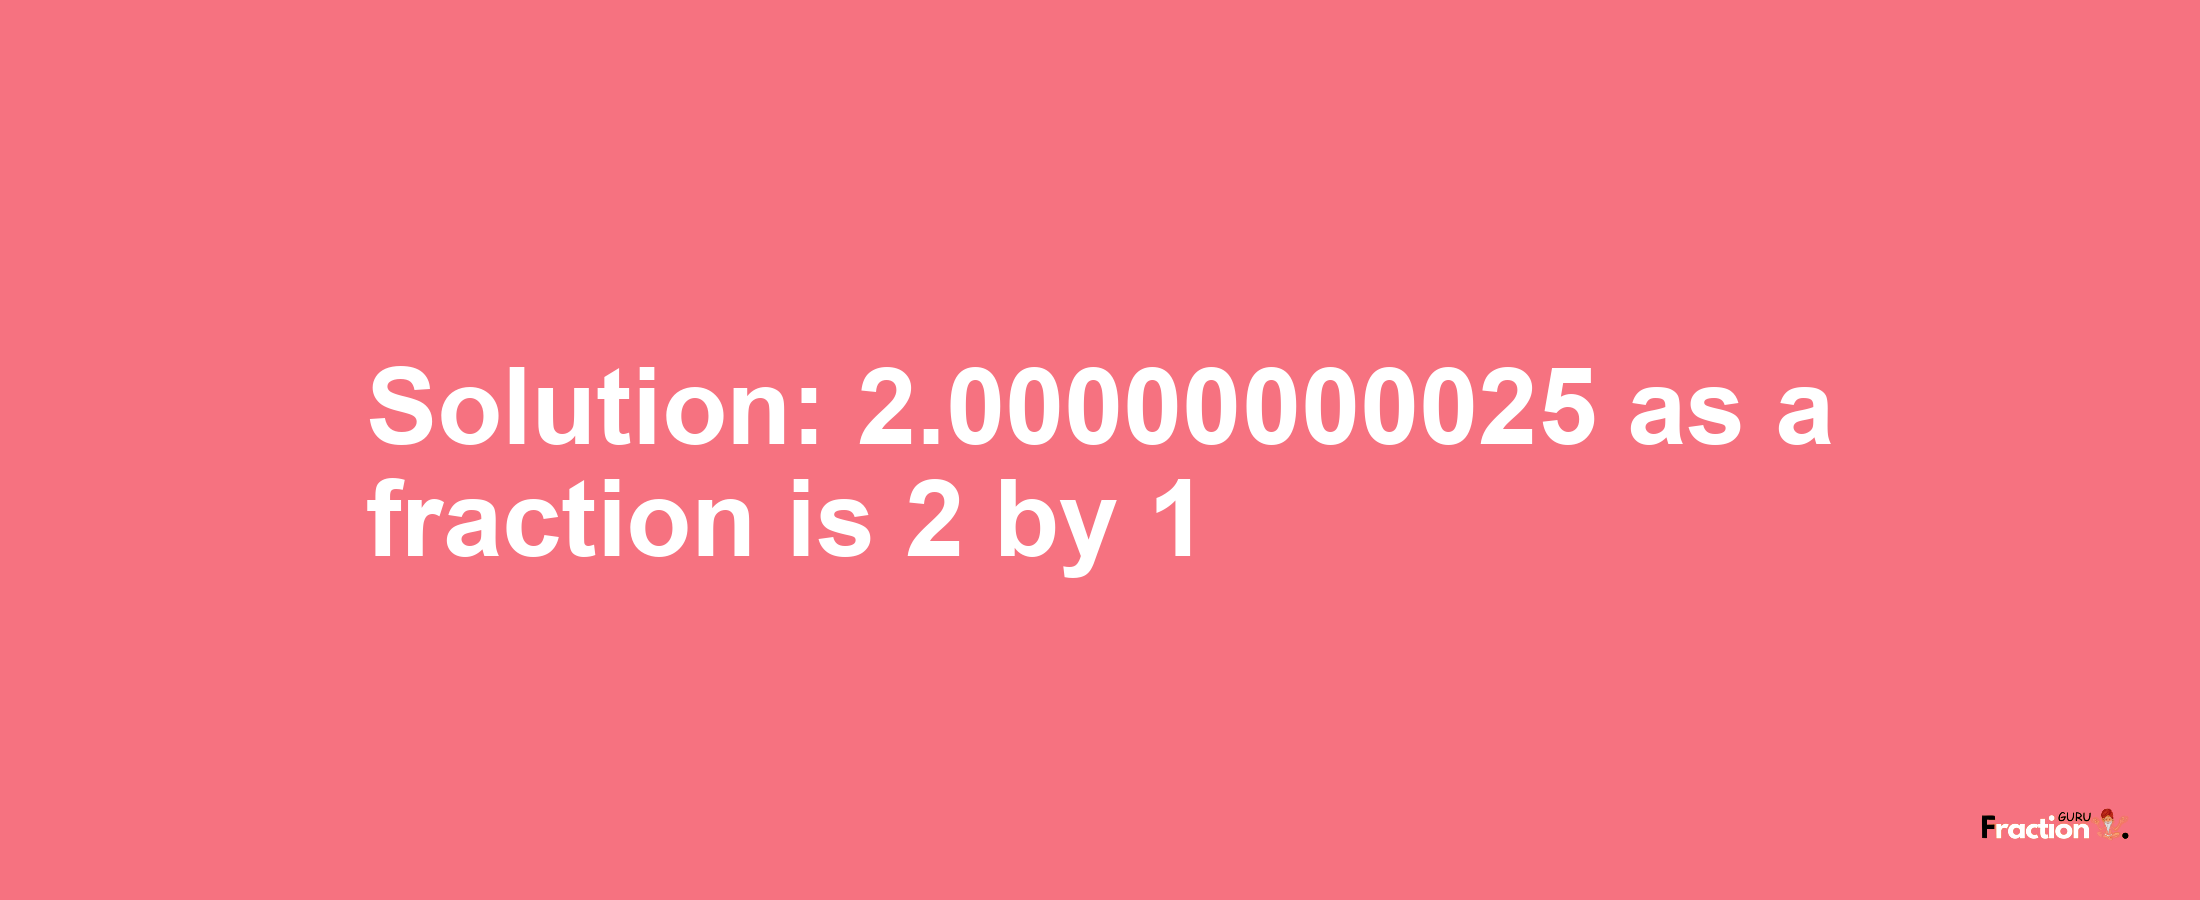 Solution:2.00000000025 as a fraction is 2/1